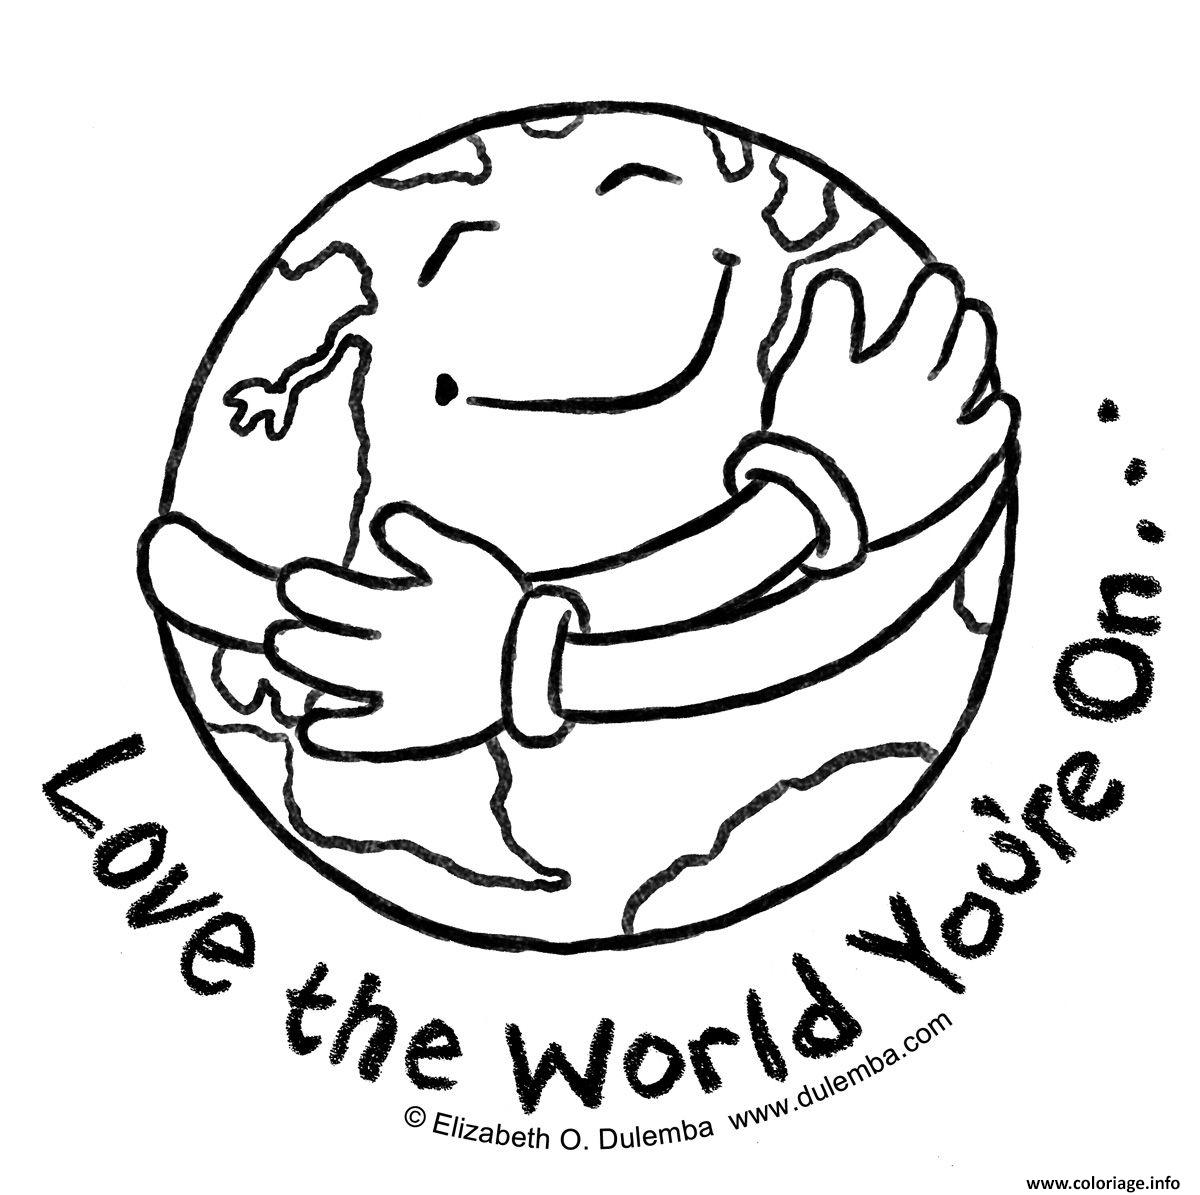 Dessin earth day love the world youre on Coloriage Gratuit à Imprimer